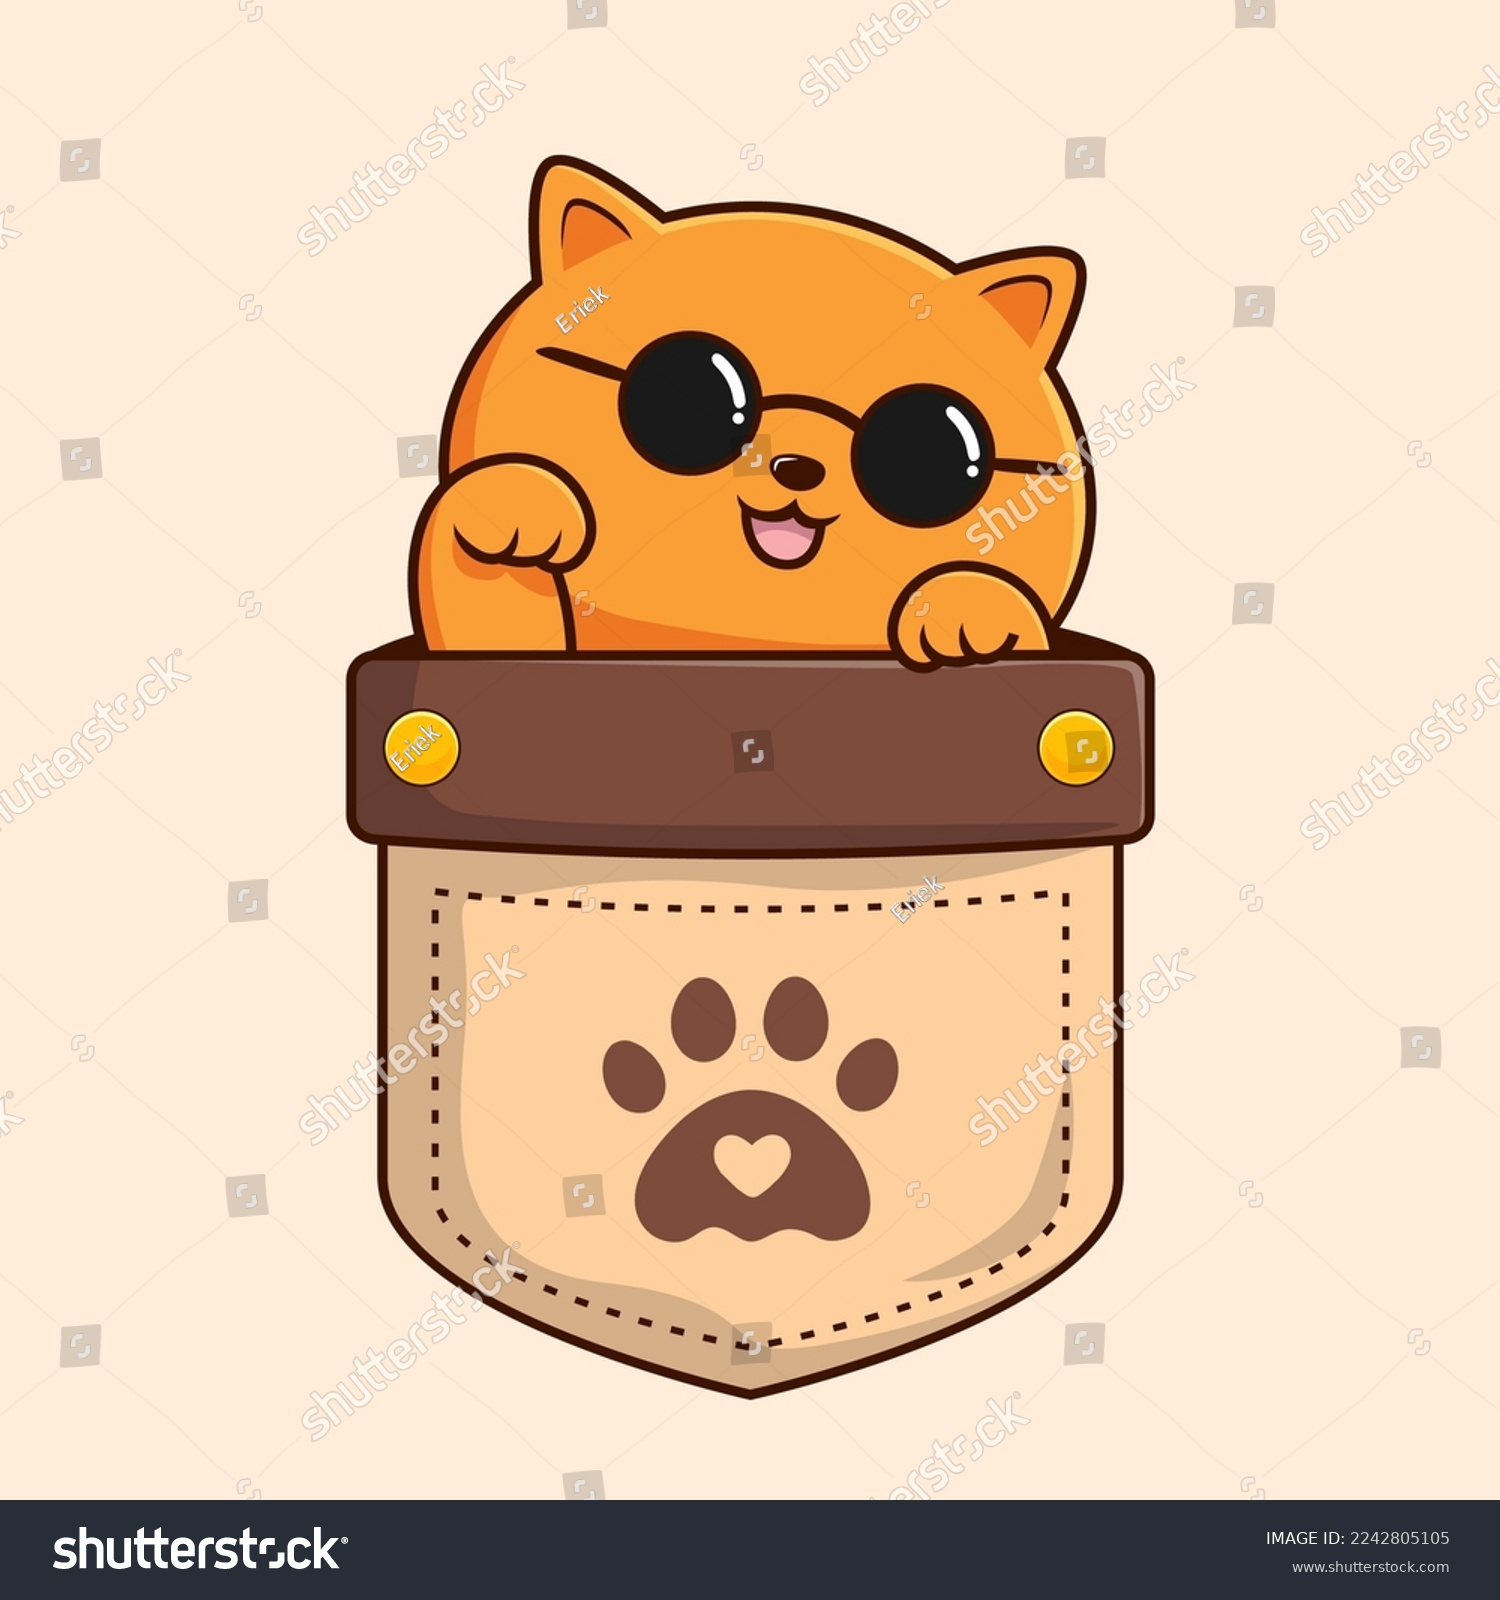 SVG of Orange Cat in Pocket Cartoon Cool with Circle Glasses - Orange Kitty Cat Vector svg